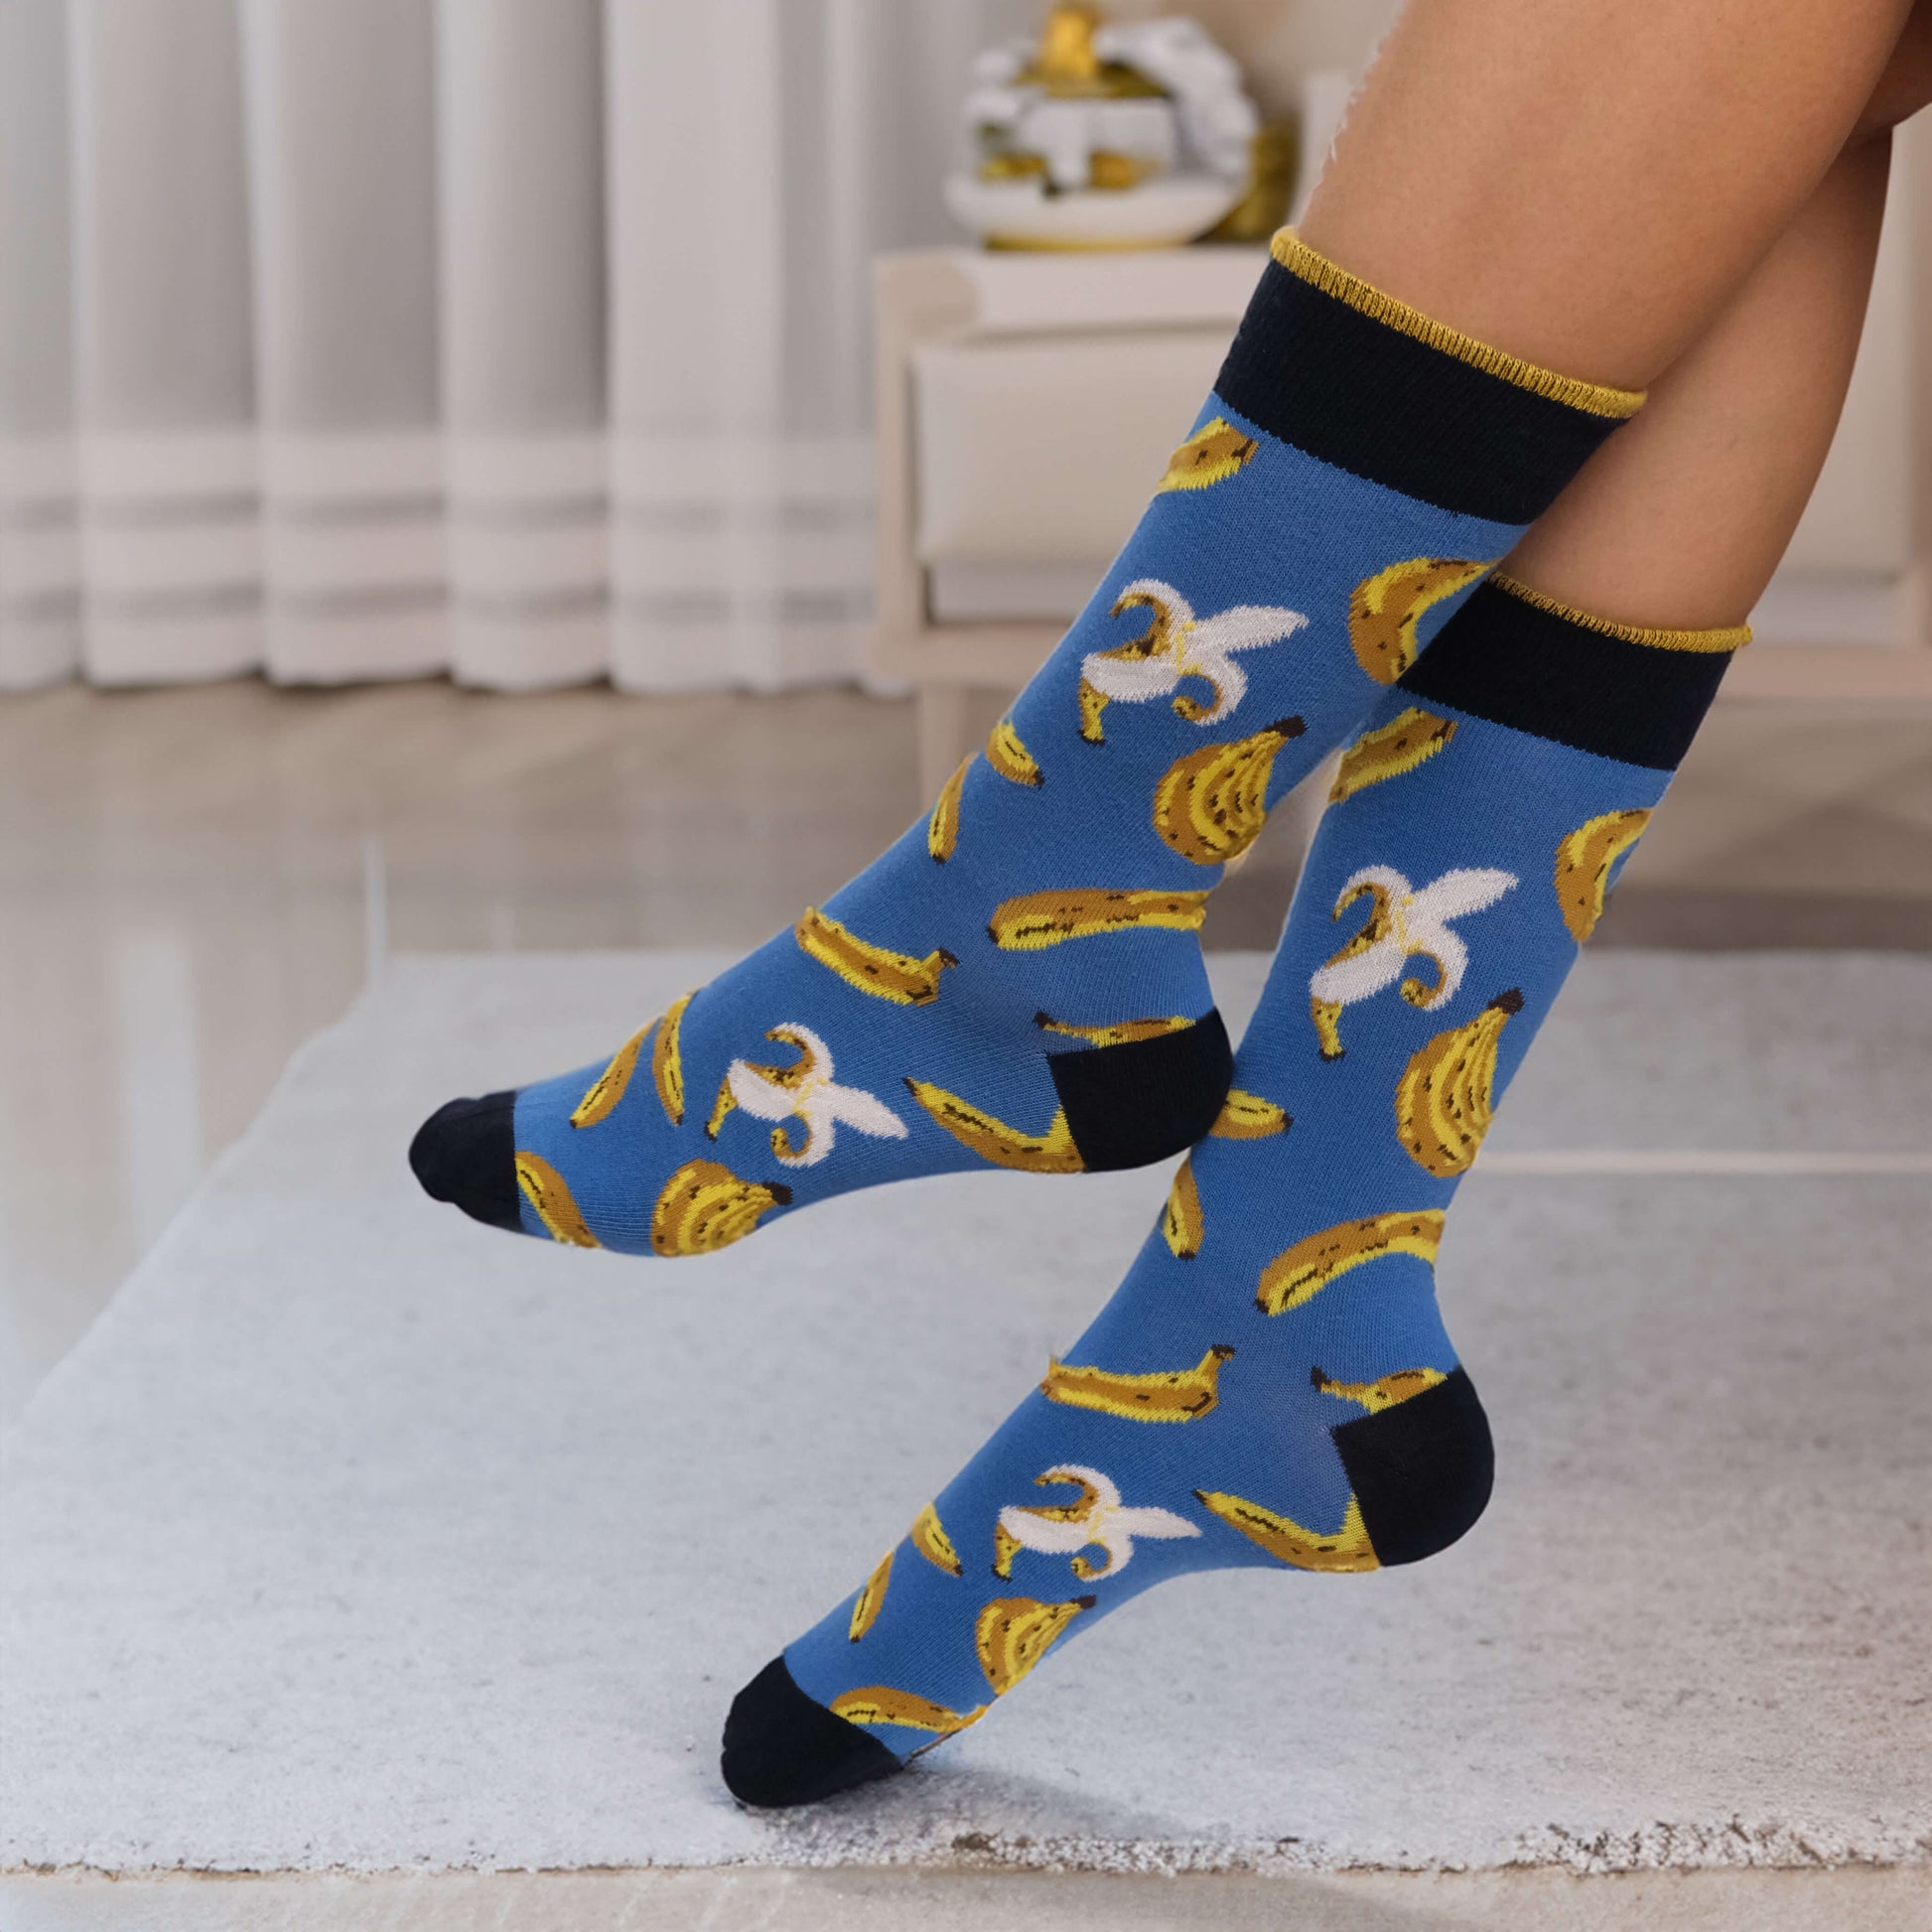 Add a touch of quirkiness to your wardrobe with these patterned socks. The design includes bananas, hotdogs, beer mugs, cheese, hot sauce, and avocados – a conversation starter for sure!